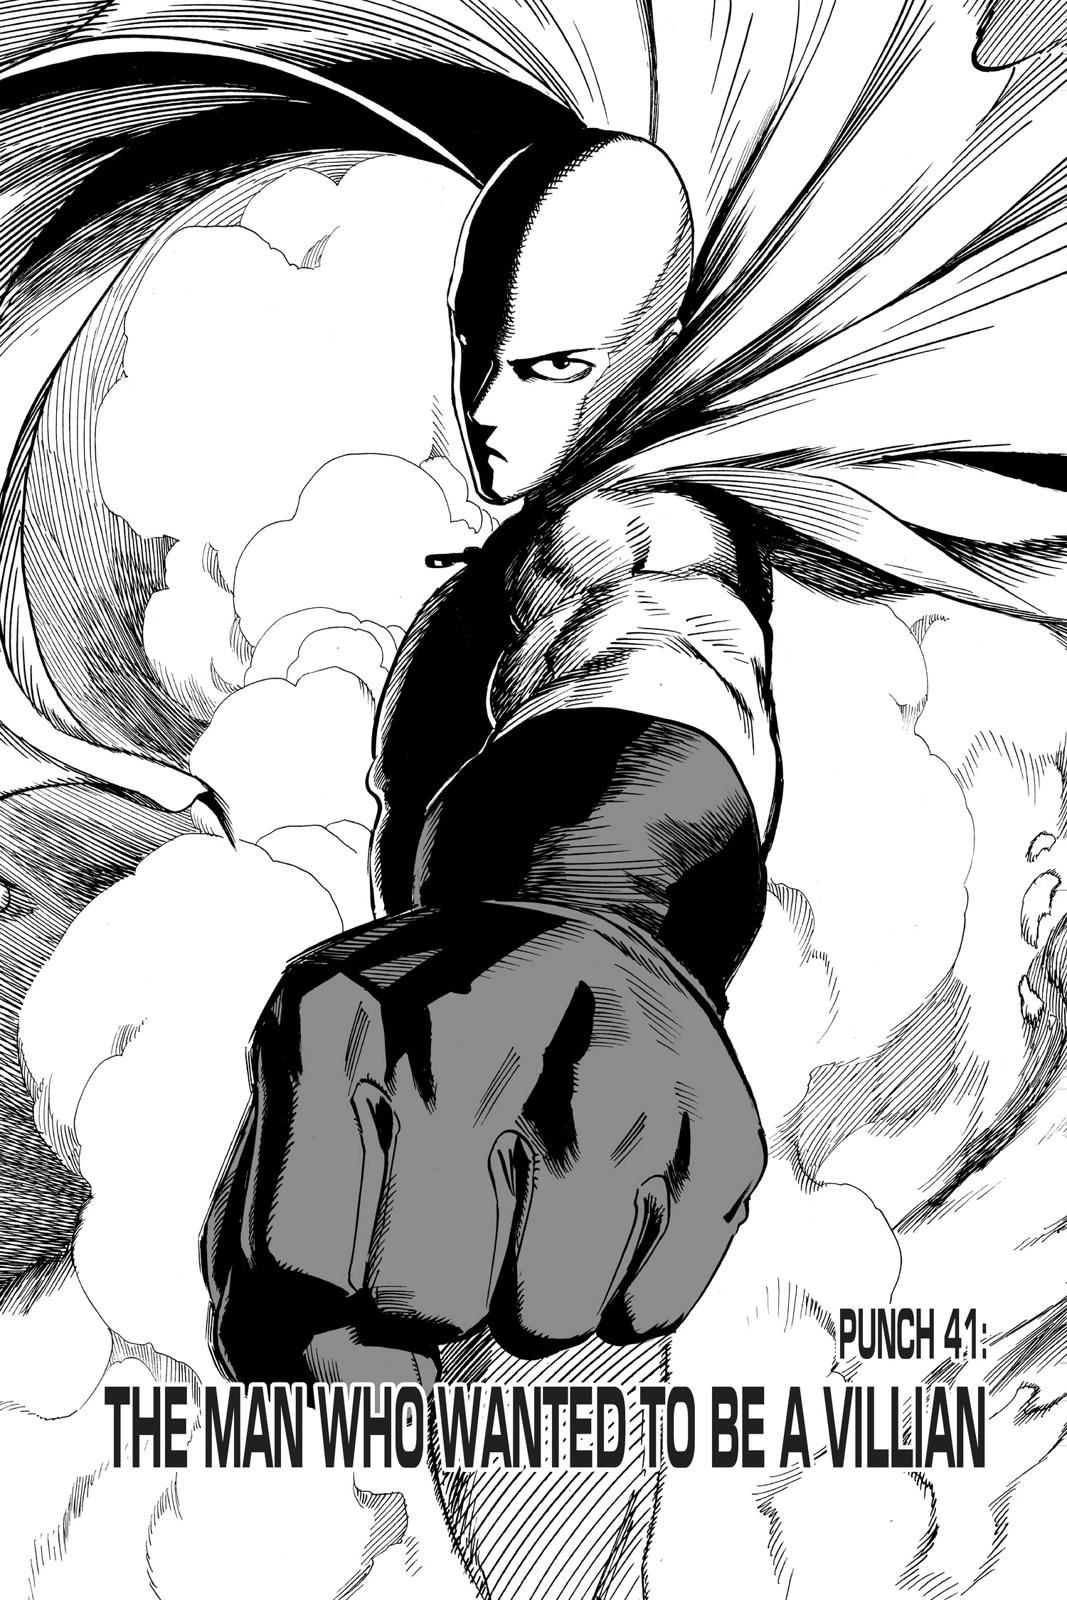 One-Punch Man, Punch 41 image 08